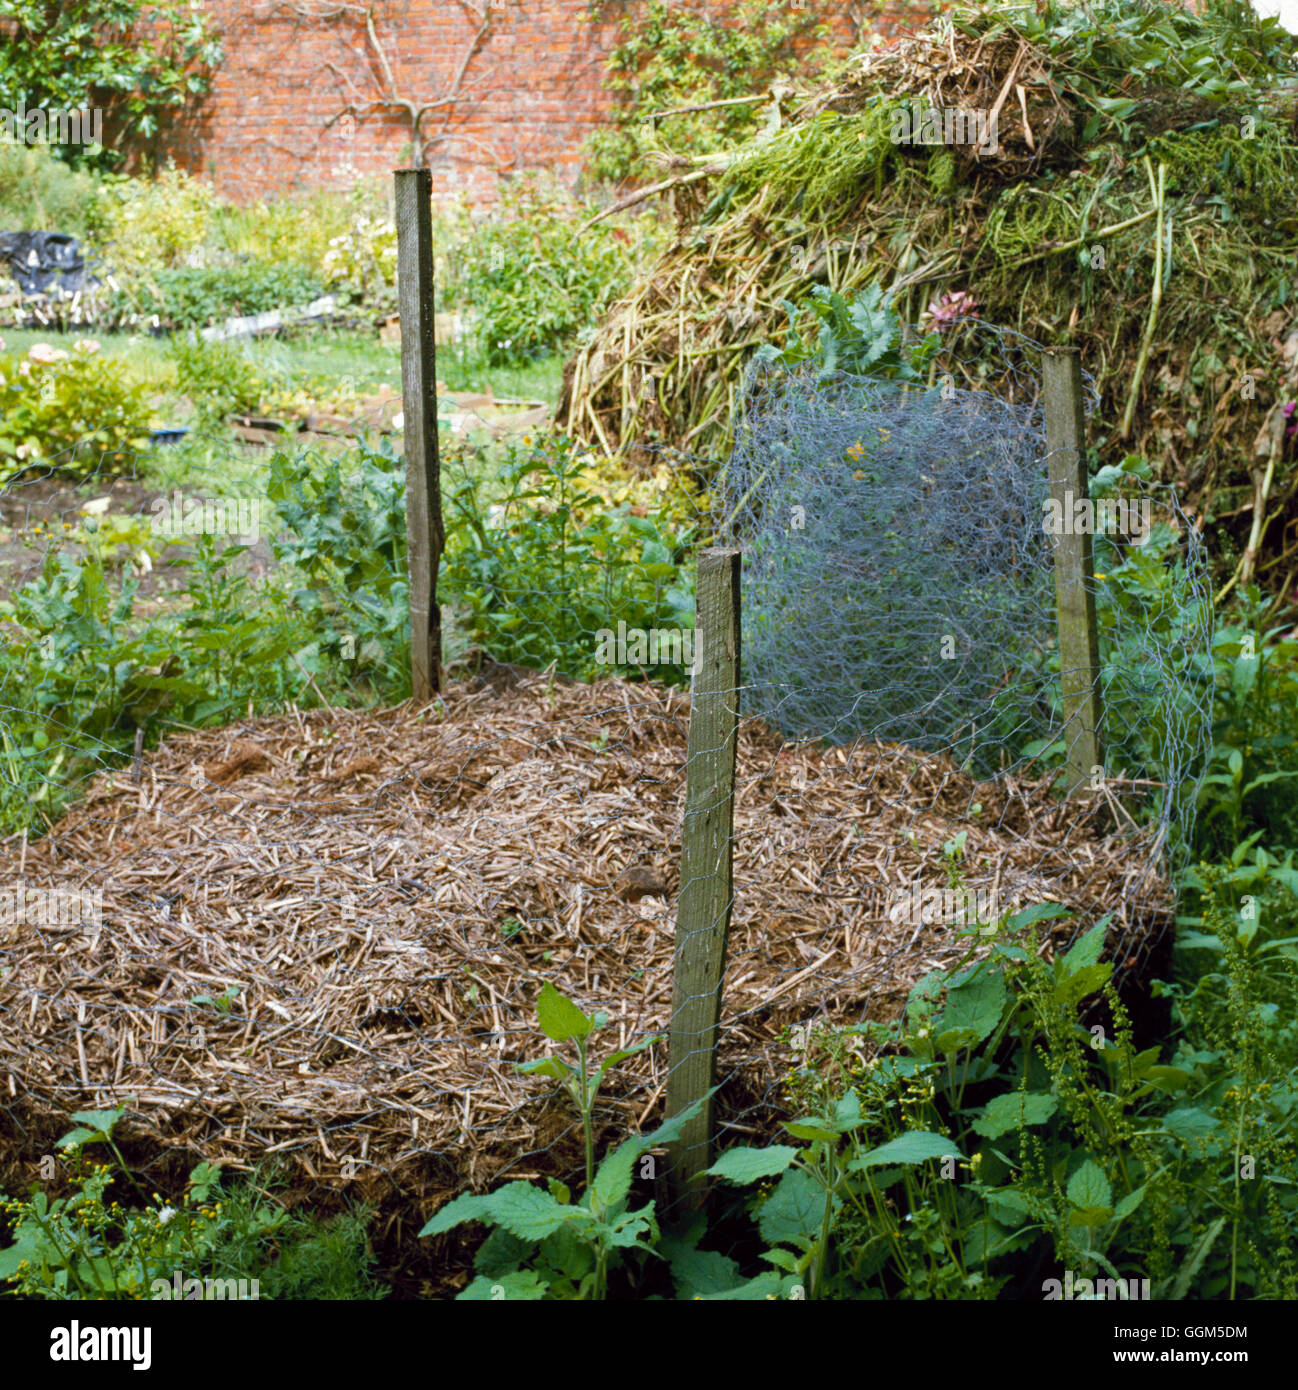 Compost - Bin - constructed with wire netting   TAS036572 Stock Photo